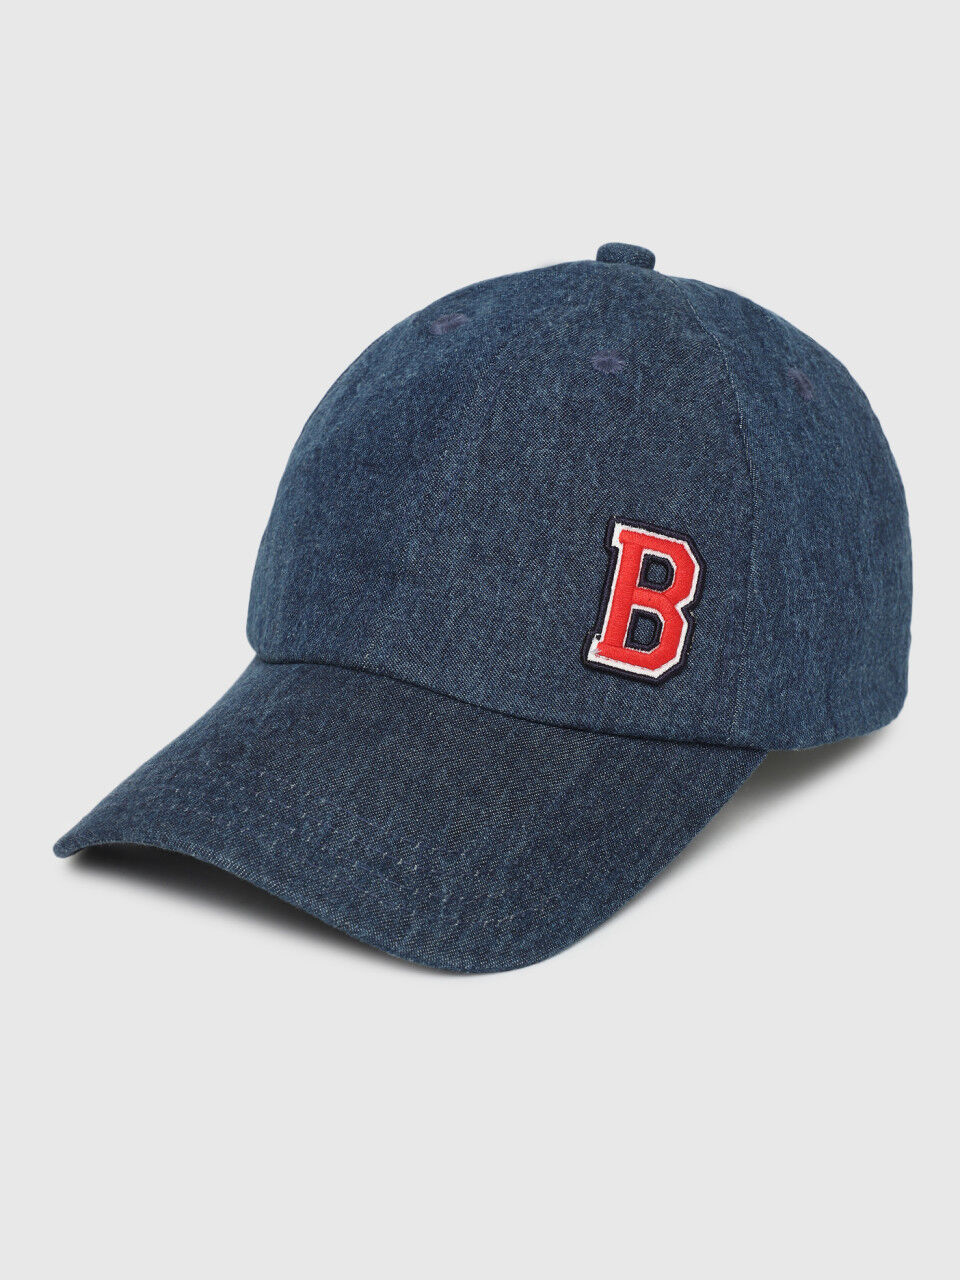 Benetton Navy Blue Cap With Embroidery